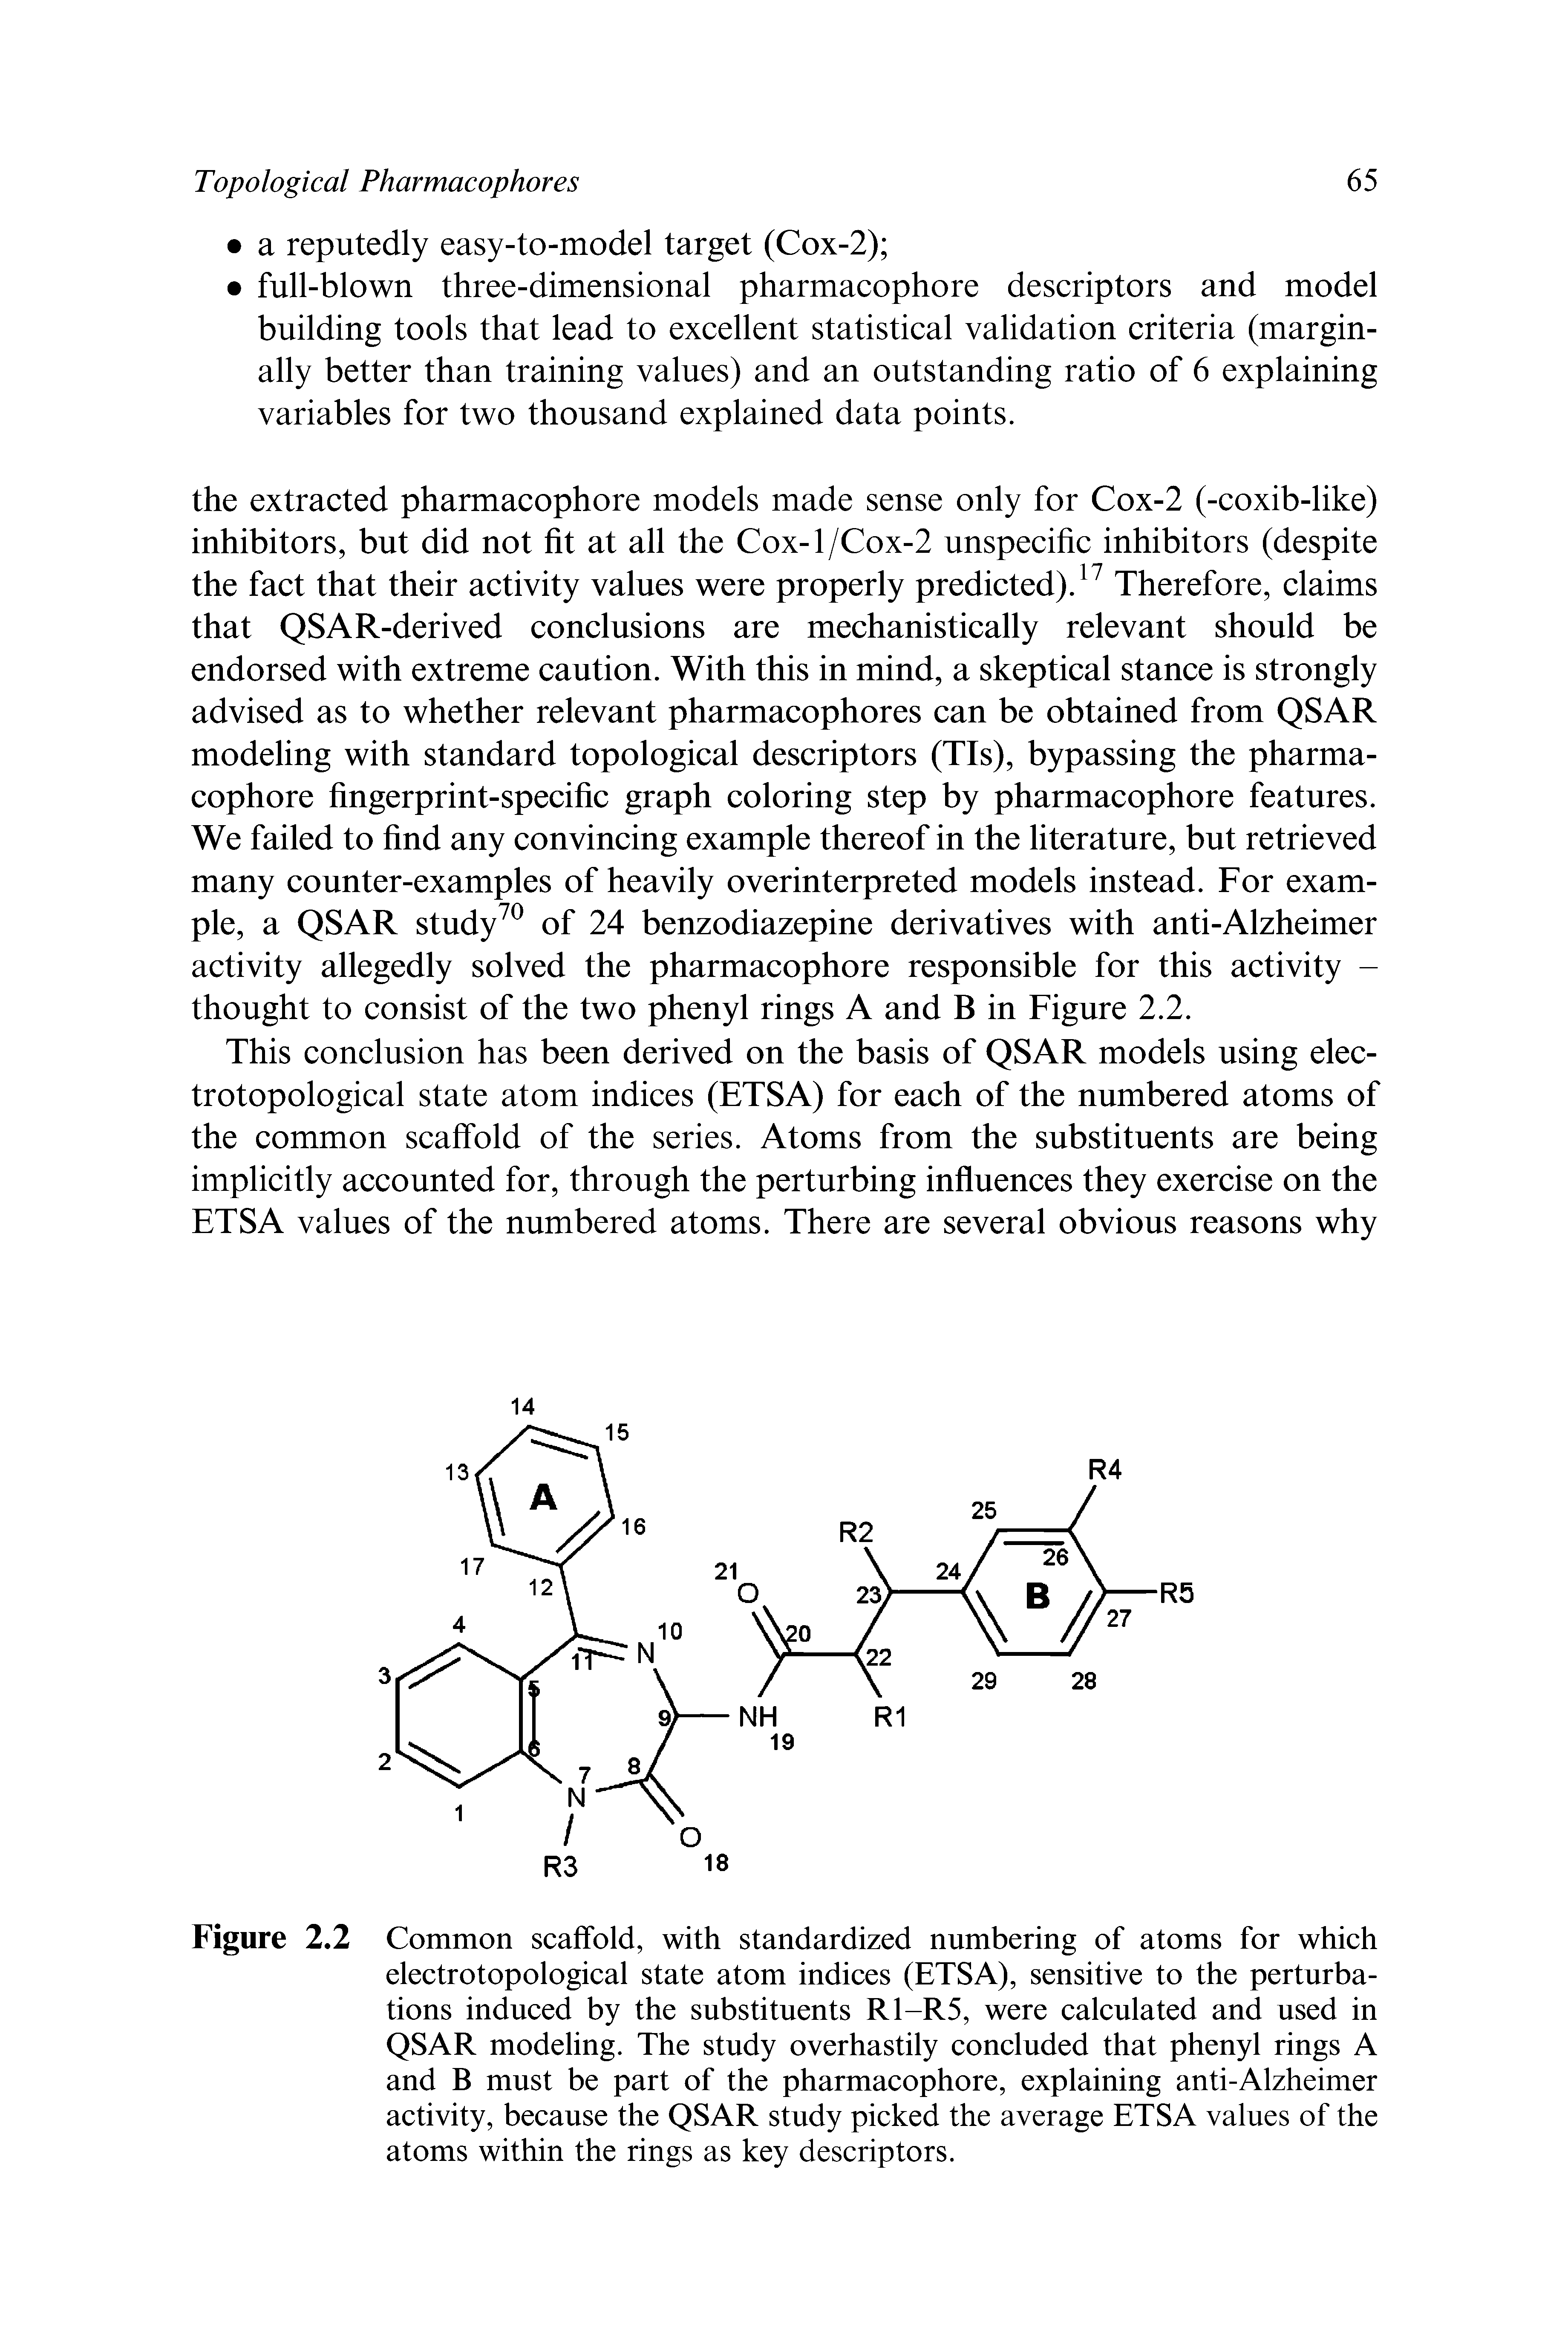 Figure 2.2 Common scaffold, with standardized numbering of atoms for which electrotopological state atom indices (ETSA), sensitive to the perturbations induced by the substituents R1-R5, were calculated and used in QSAR modeling. The study overhastily concluded that phenyl rings A and B must be part of the pharmacophore, explaining anti-Alzheimer activity, because the QSAR study picked the average ETSA values of the atoms within the rings as key descriptors.